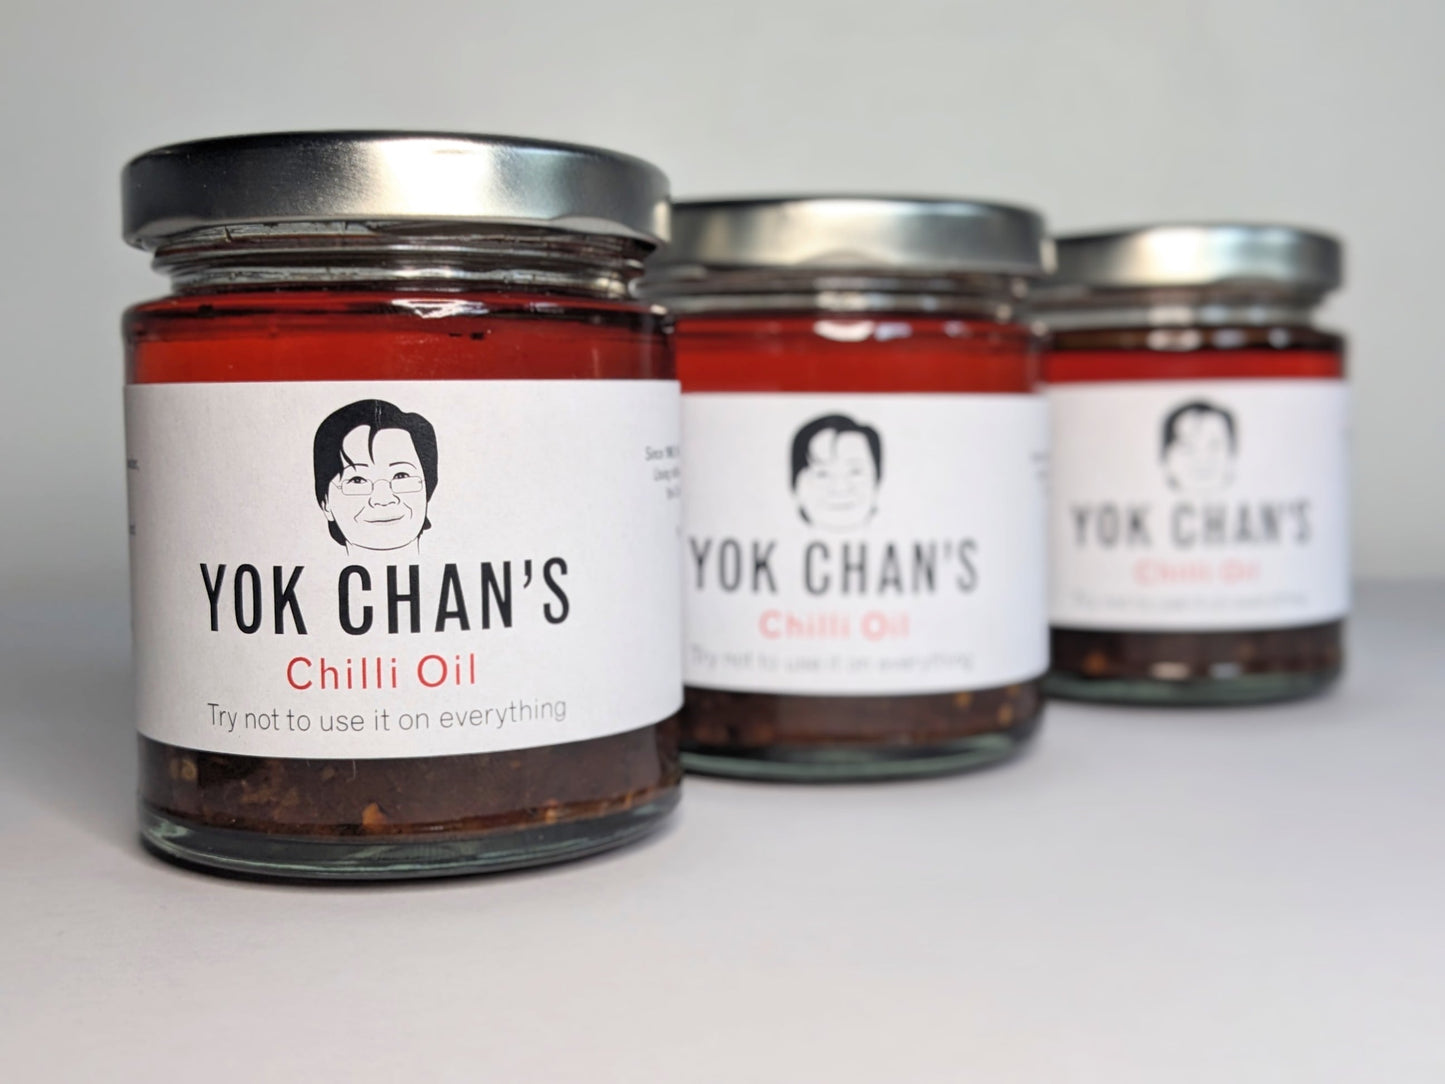 Three jars of Yok Chan's Chilli Oil in a row